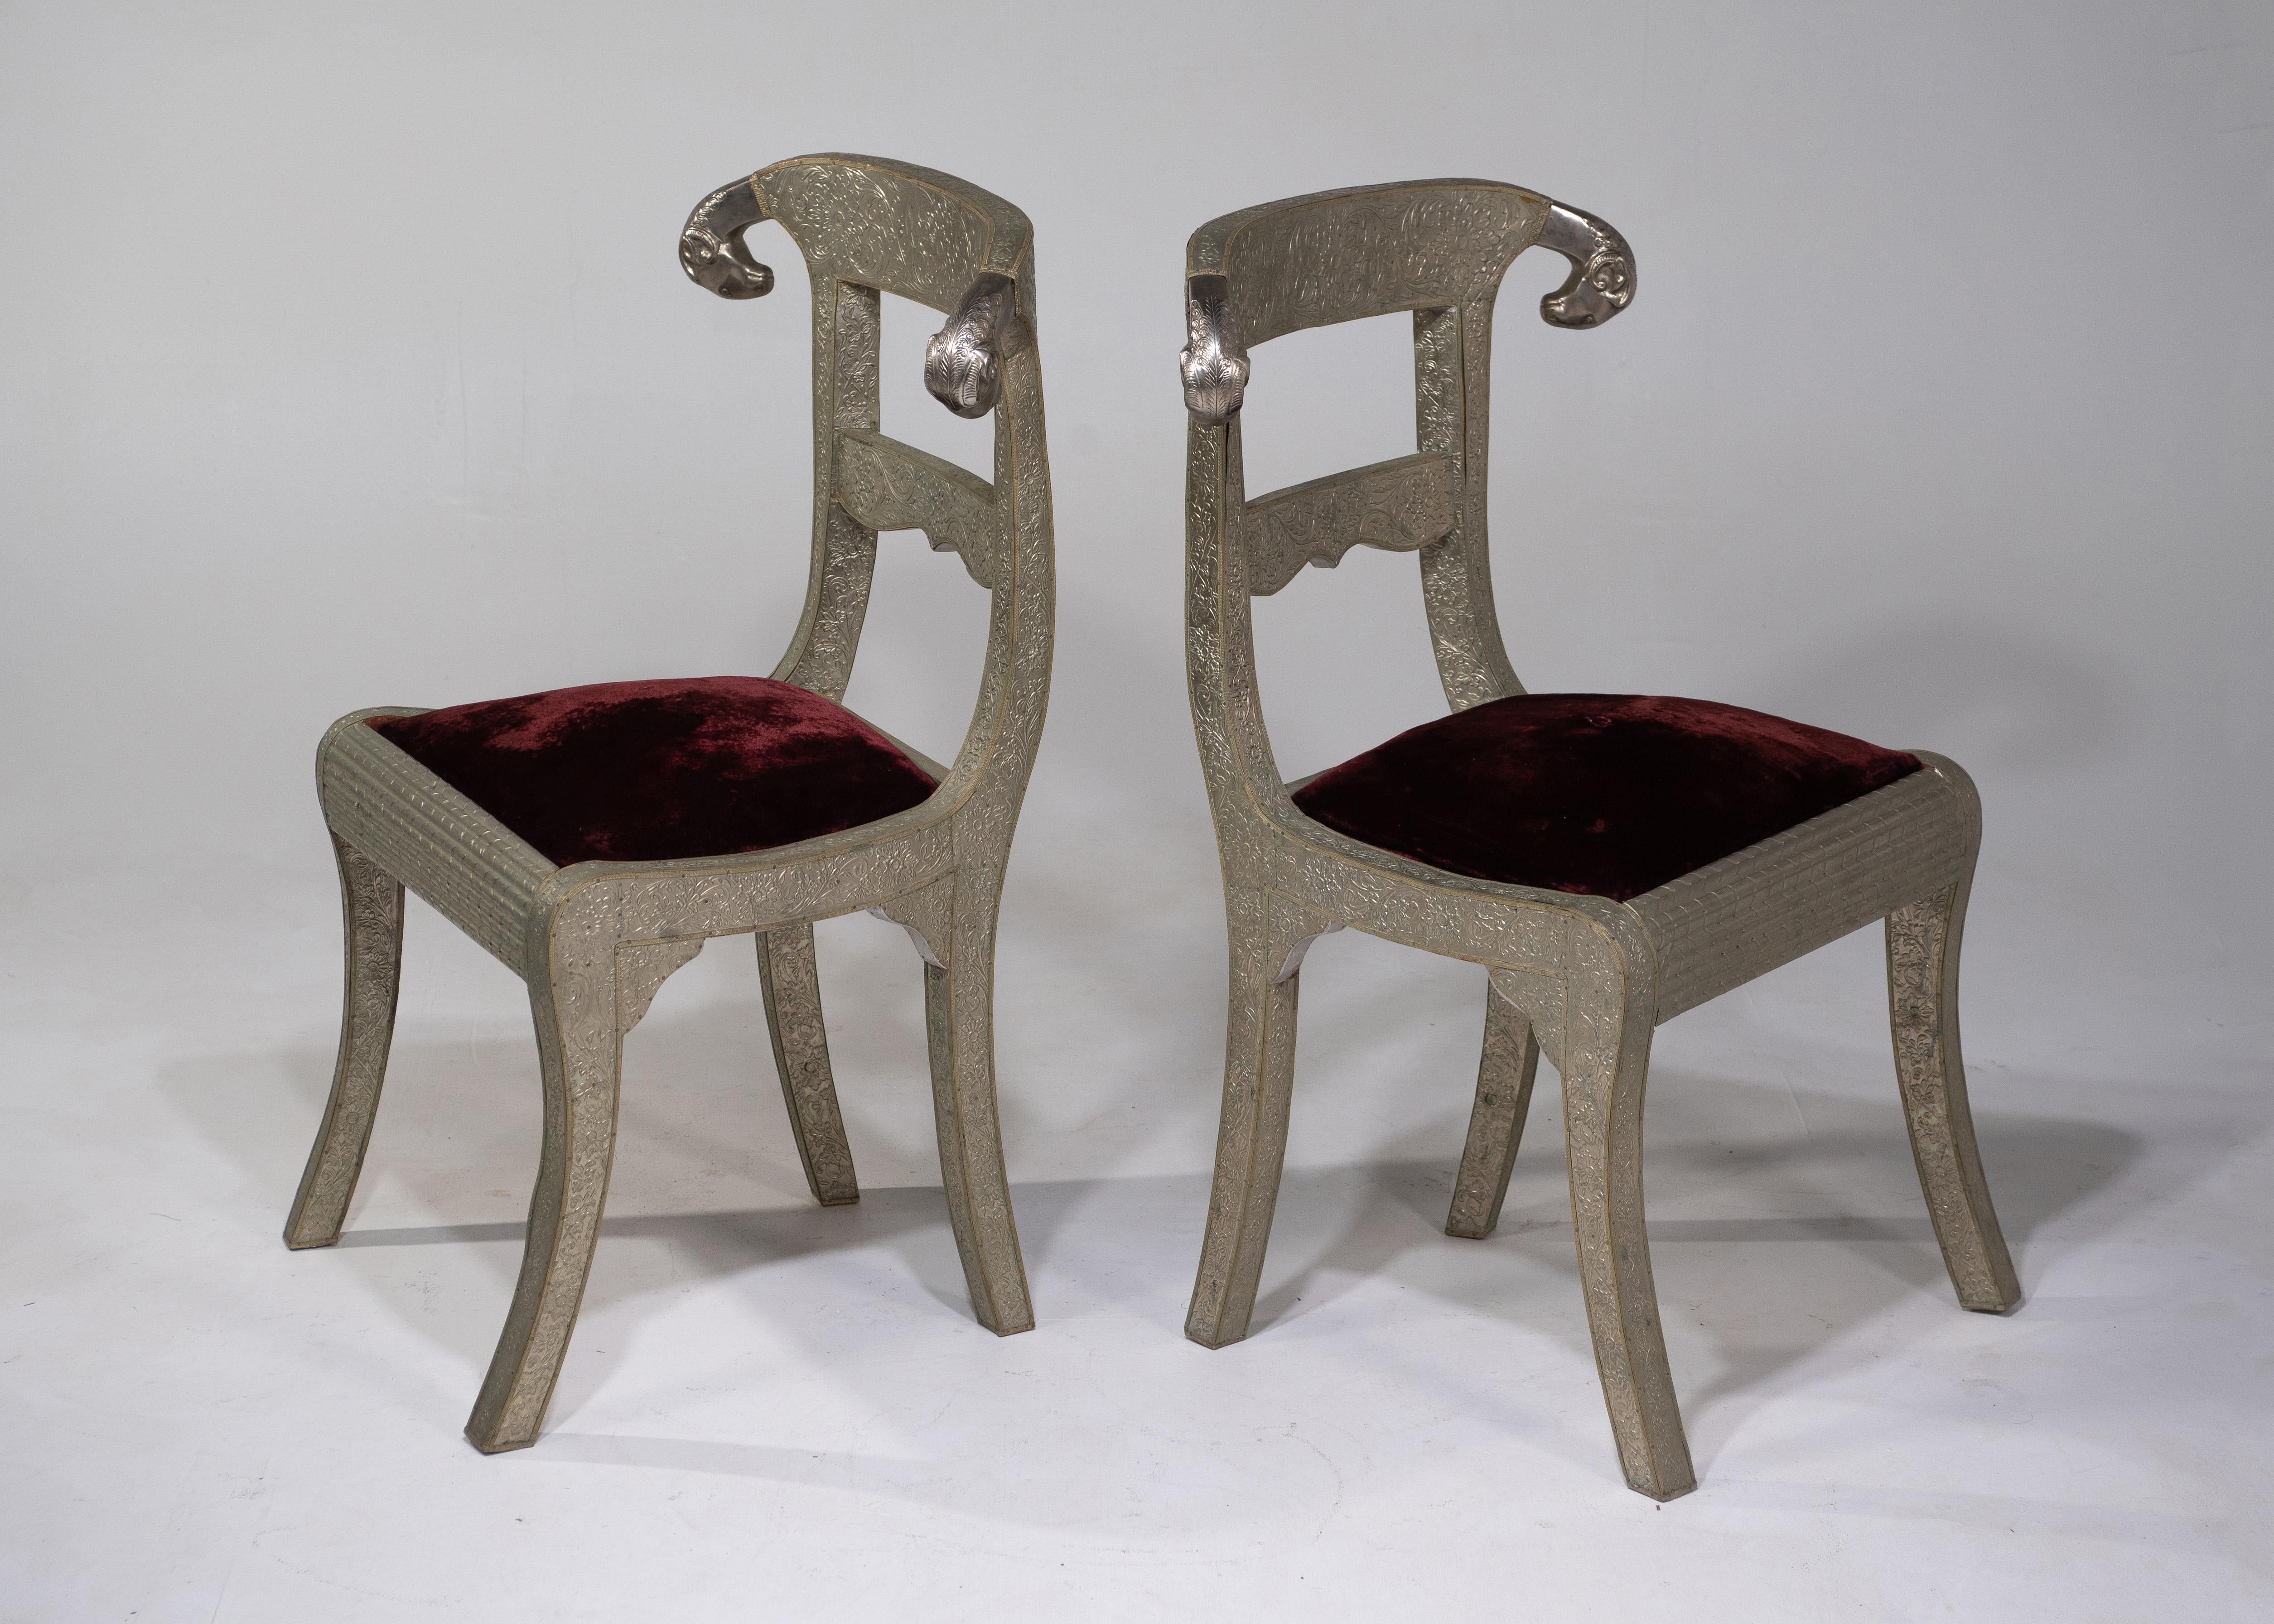 A very glam pair of vintage Anglo-Indian dowry side chairs with fabulous ram's heads and wooden frames clad in meticulously detailed embossed silver metal. Chairs are upholstered but should be redone. Seat height 18.